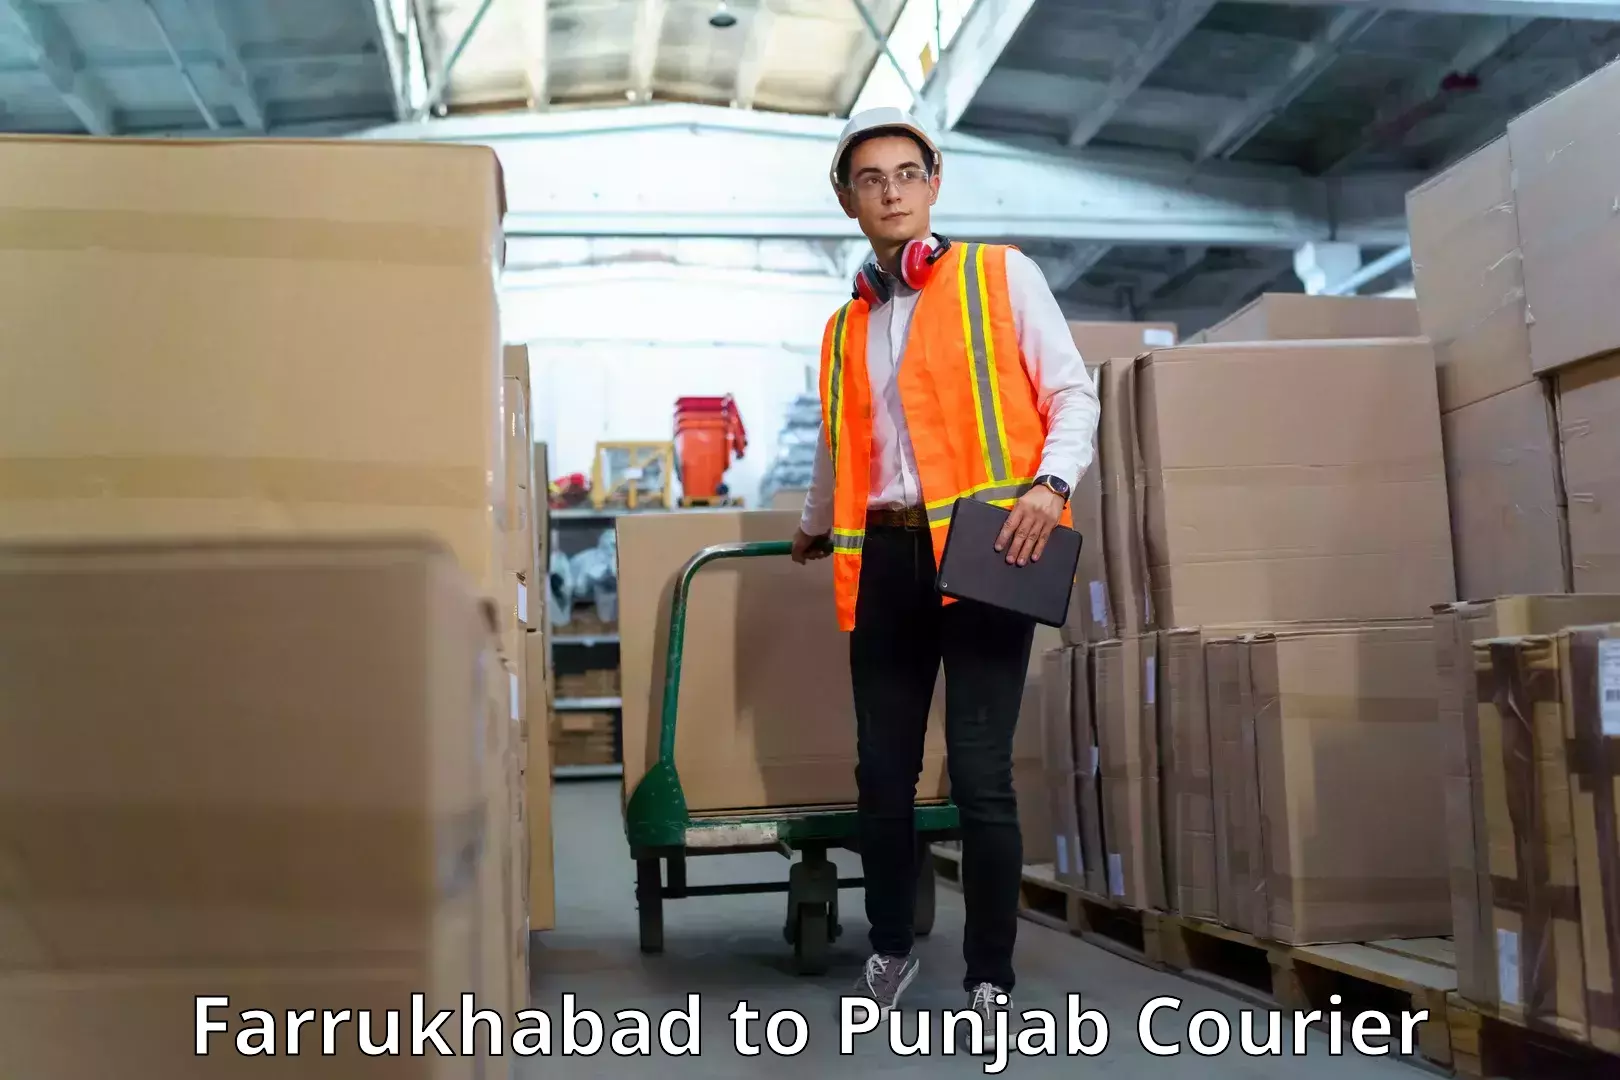 Customer-focused courier Farrukhabad to Ajnala